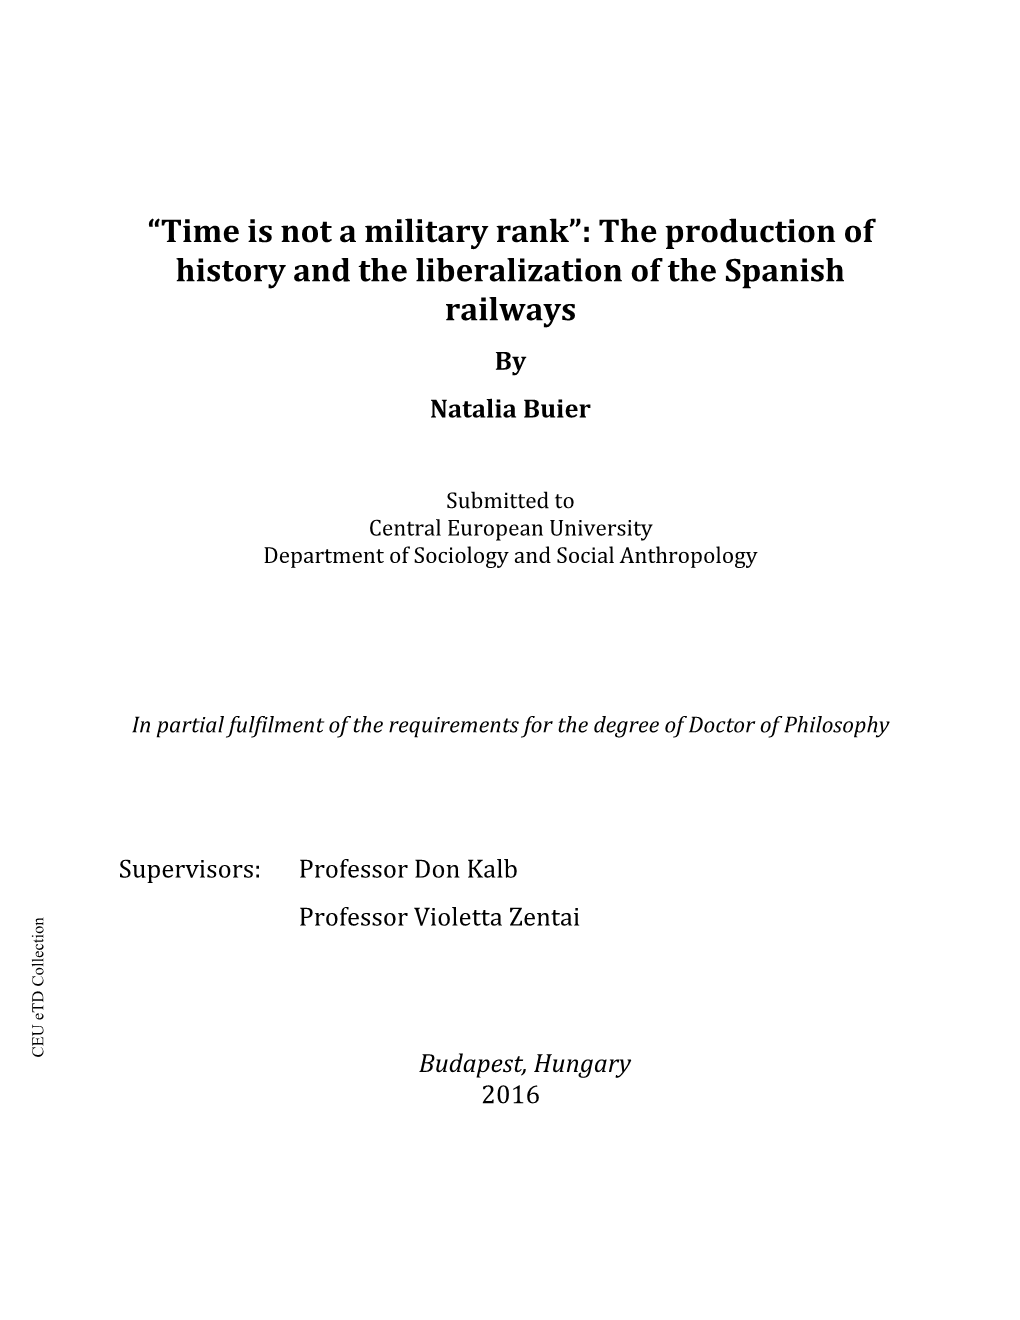 Time Is Not a Military Rank”: the Production of History and the Liberalization of the Spanish Railways by Natalia Buier